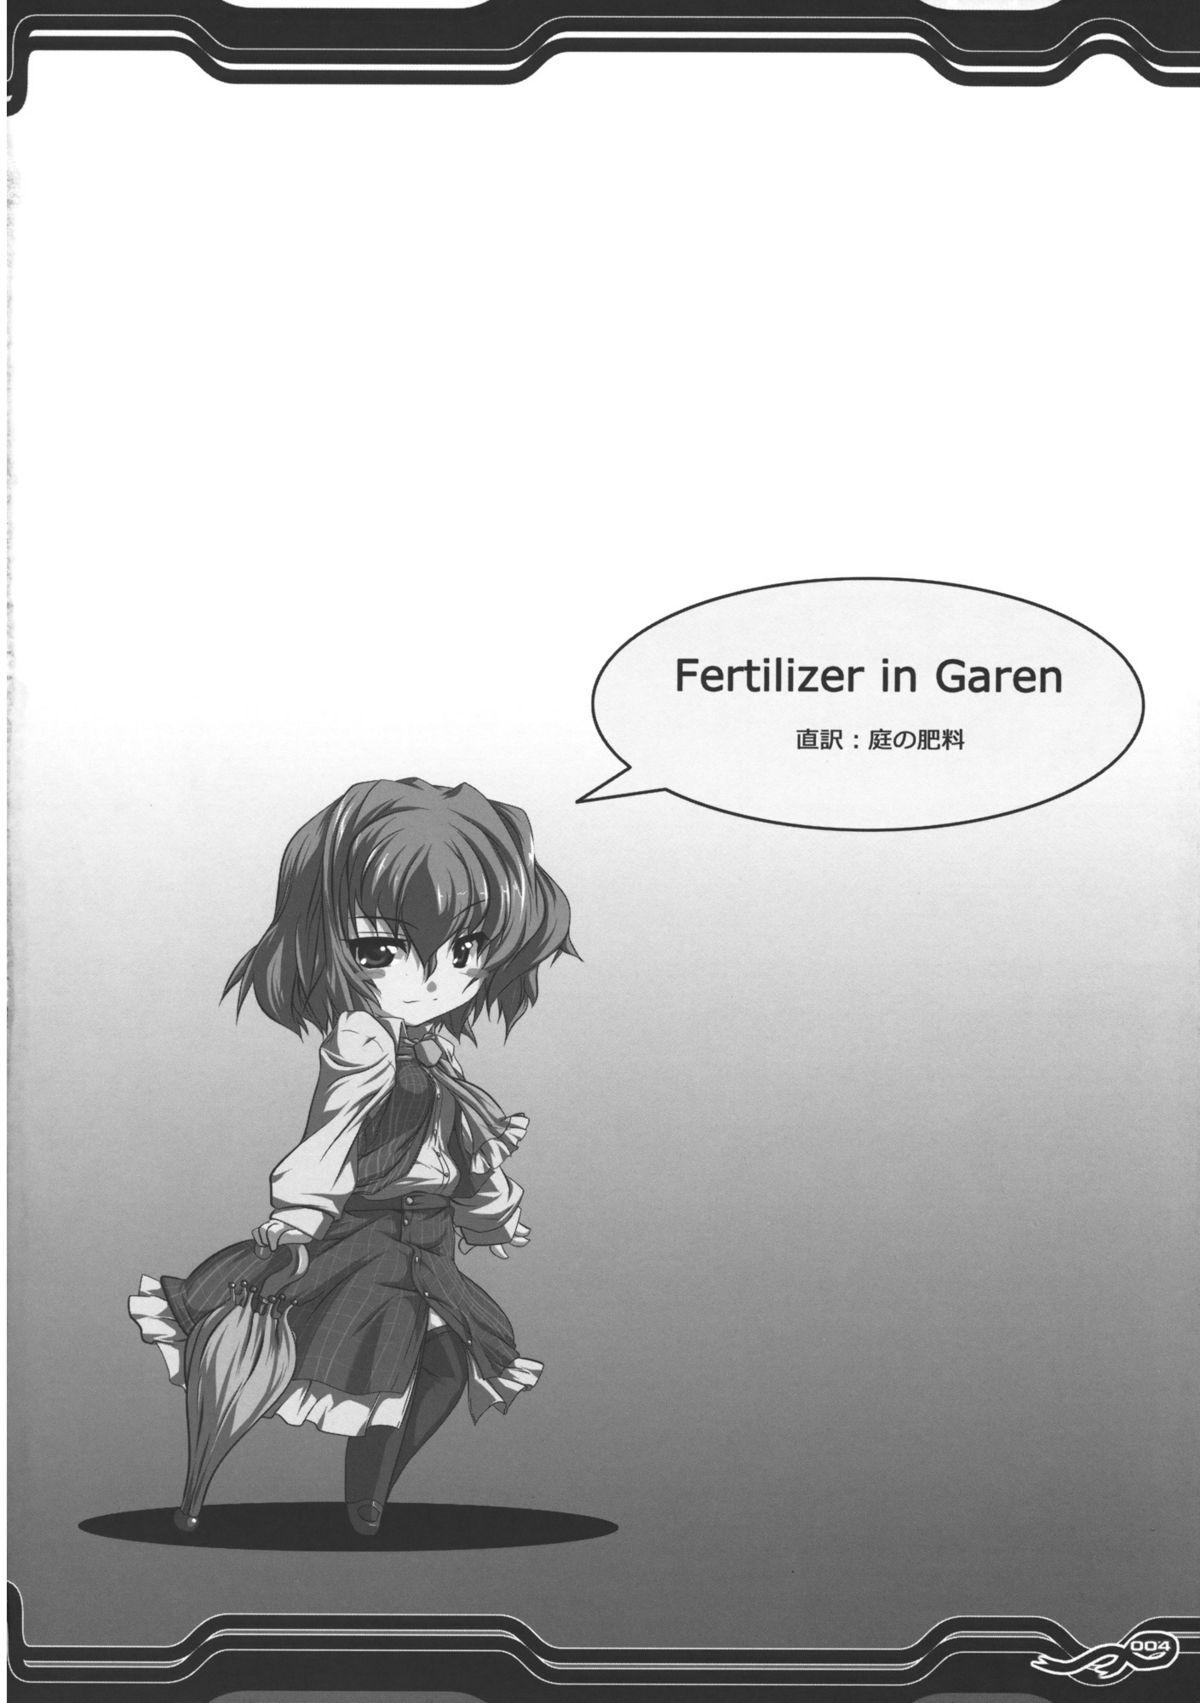 Banheiro FERTILIZER IN GARDEN - Touhou project Nylons - Page 3